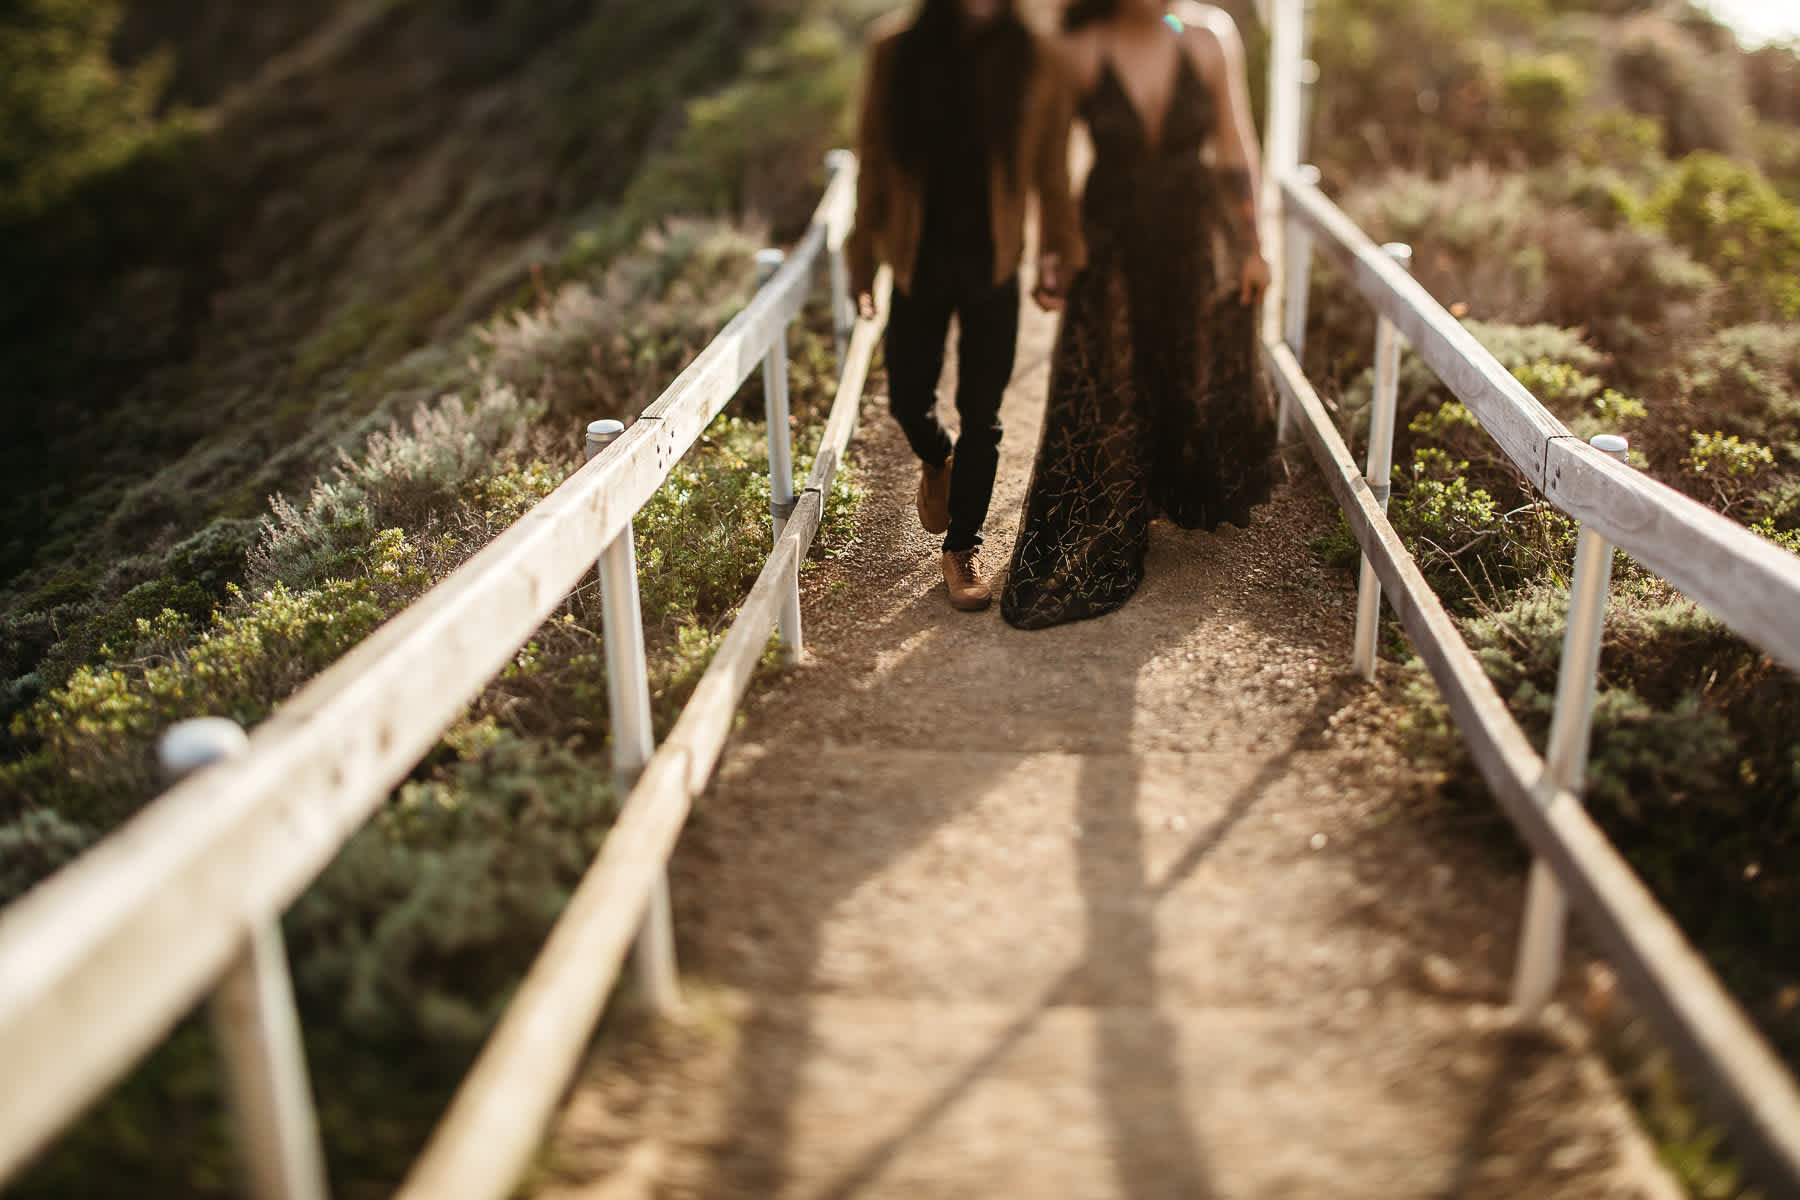 muir-beach-ca-spring-lifestyle-engagement-session-27